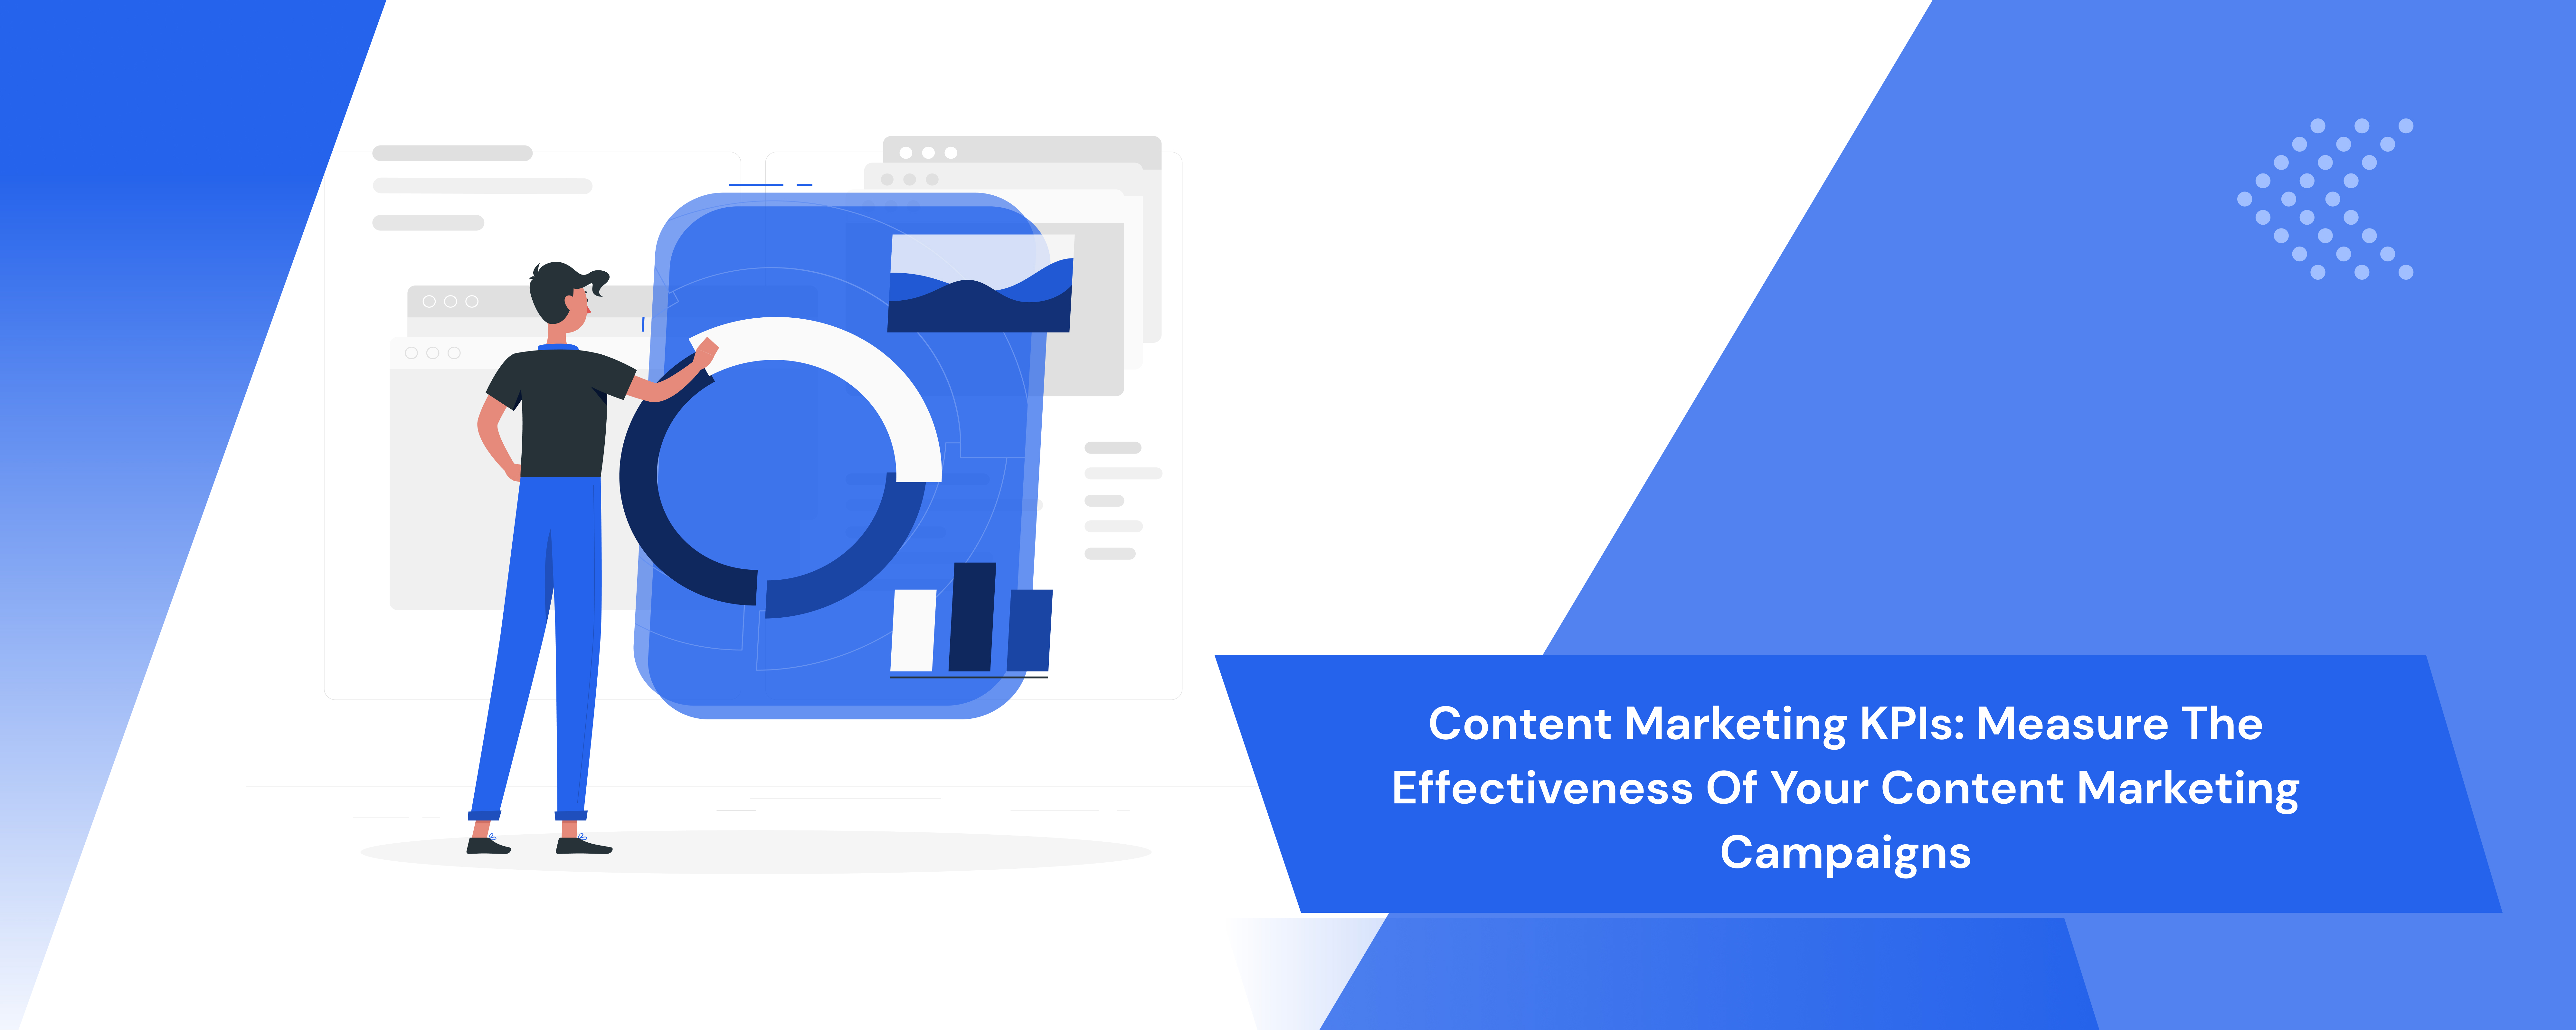 Content Marketing KPIs: Measure the Effectiveness of Your Content Marketing Campaigns